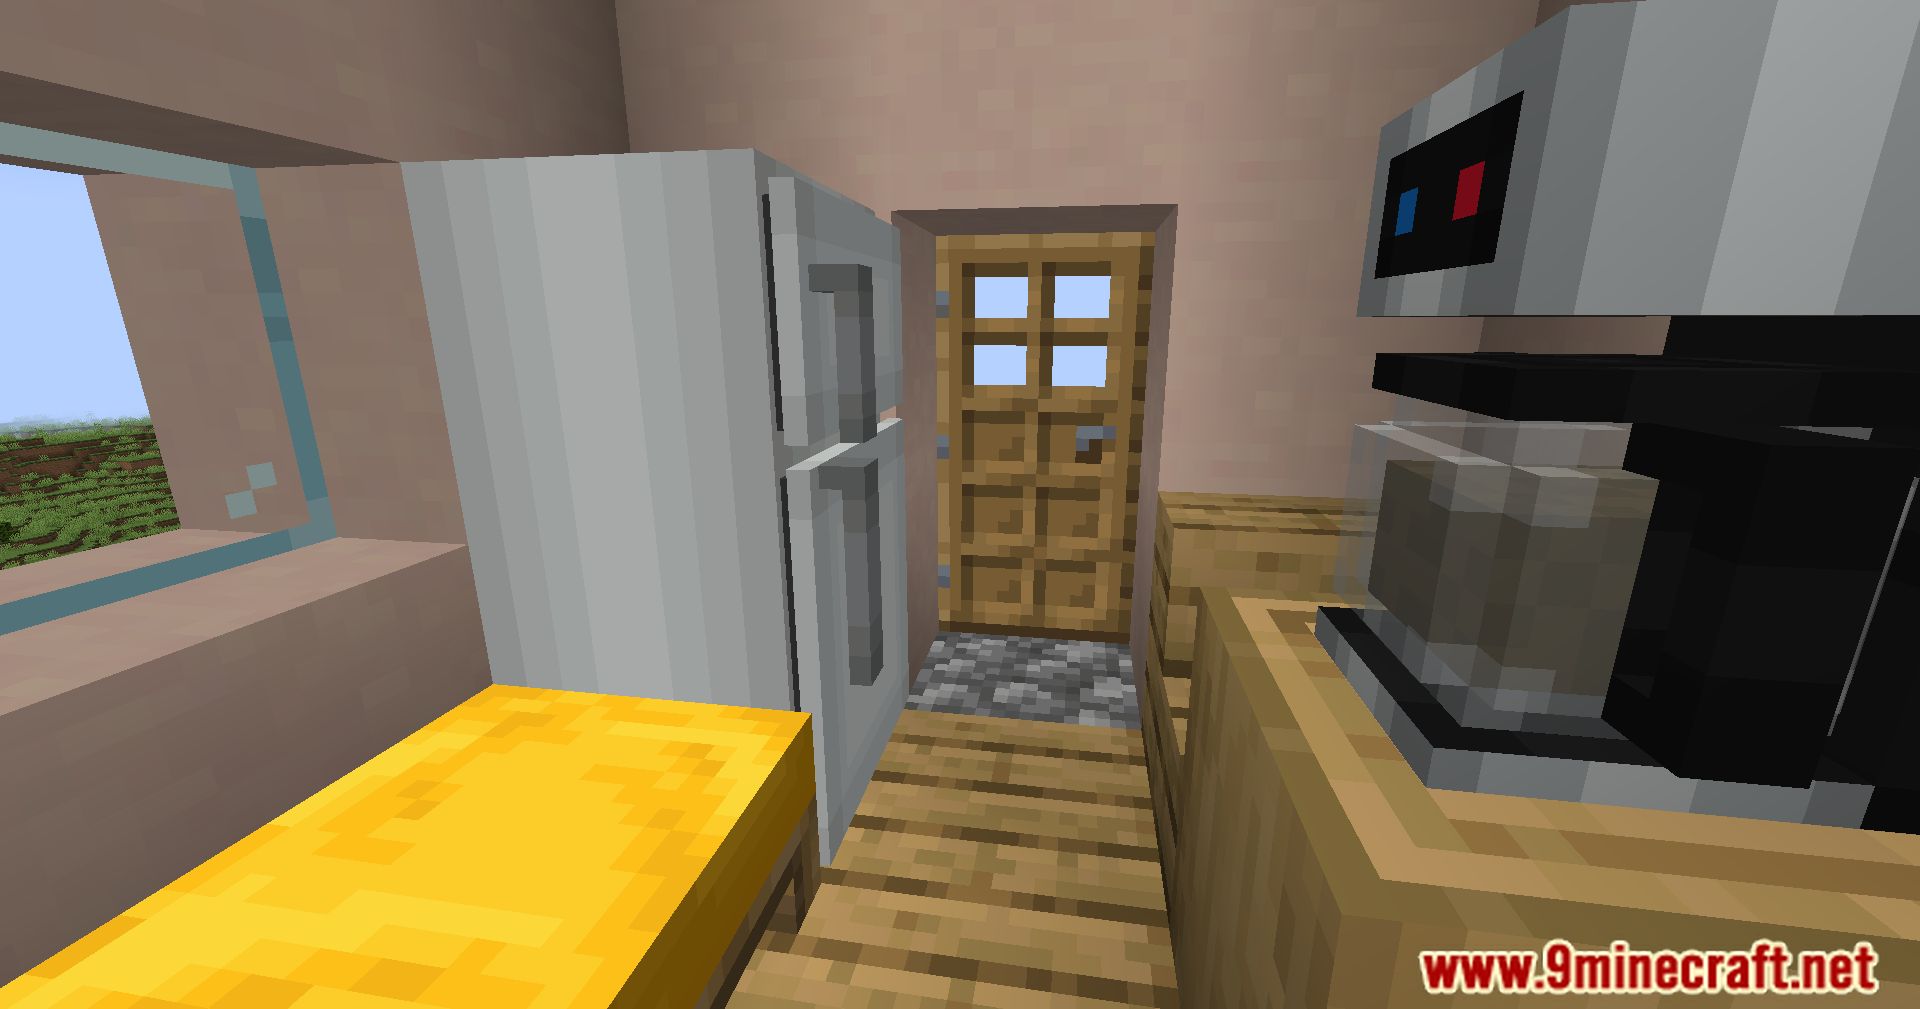 Moa Decor Cookery Mod (1.20.1, 1.19.4) - Infuse Artistic Flair Into Your Minecraft World! 9